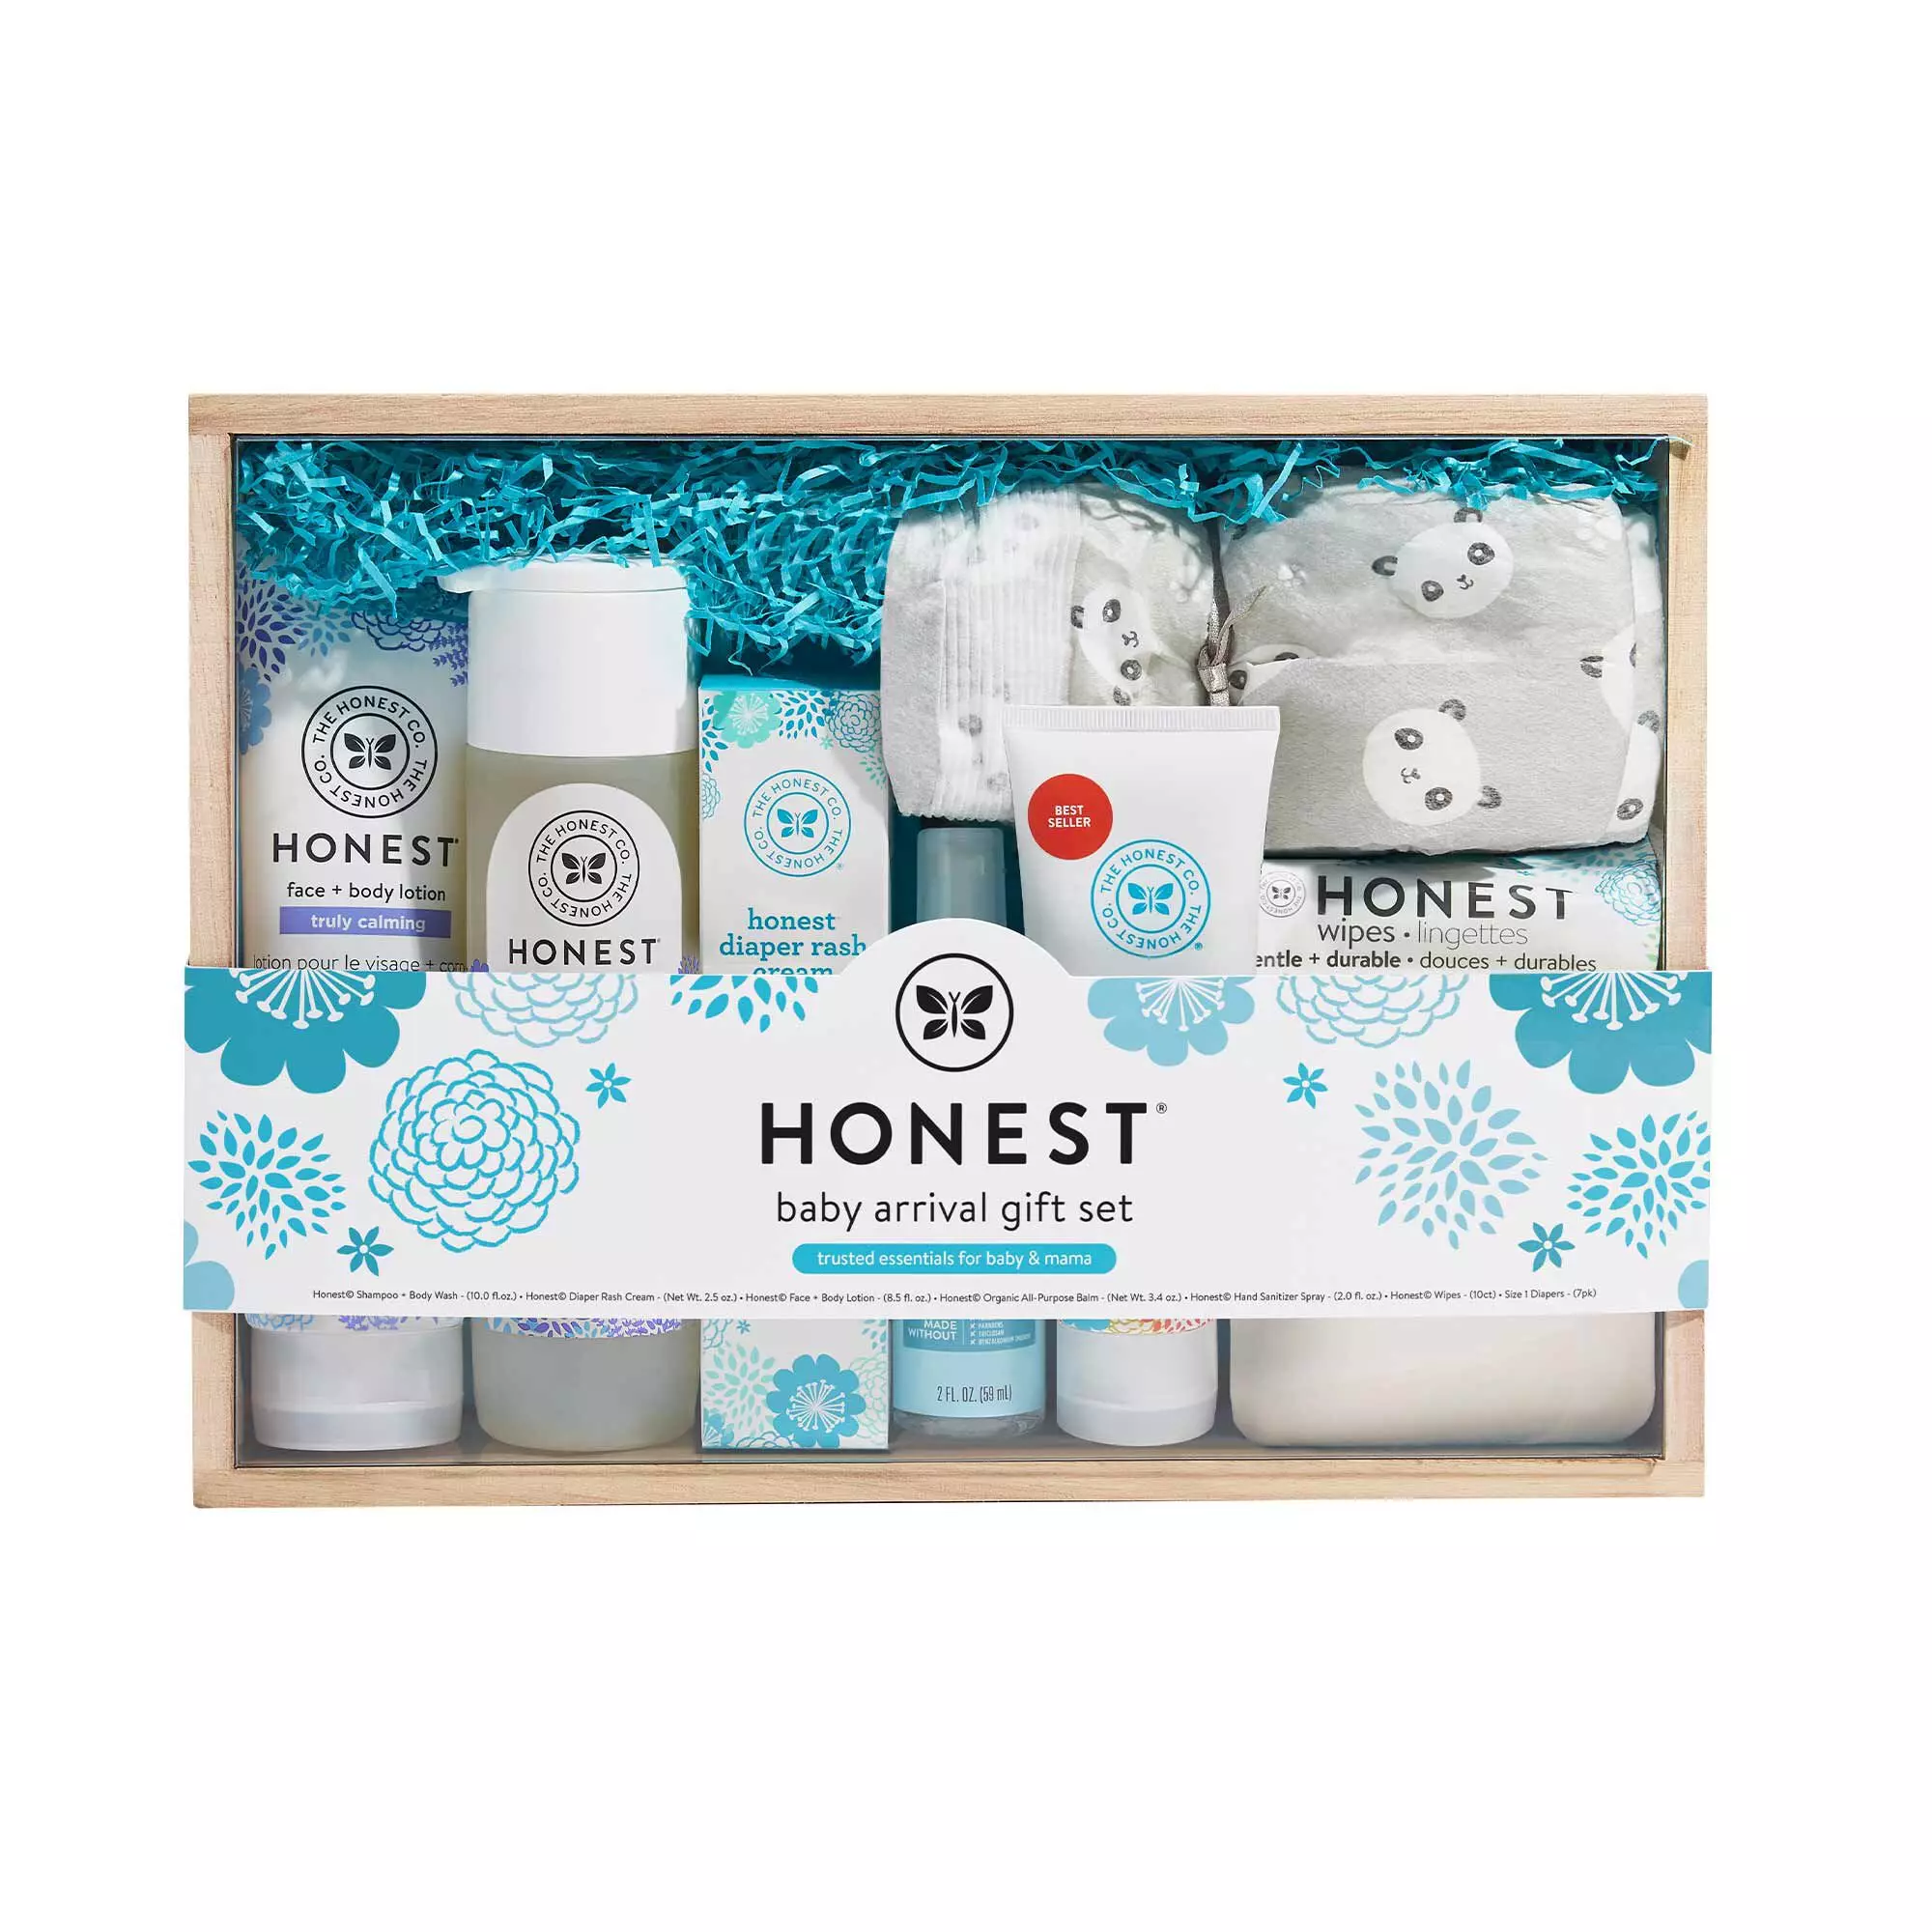 The Honest Baby Arrival Gift Set